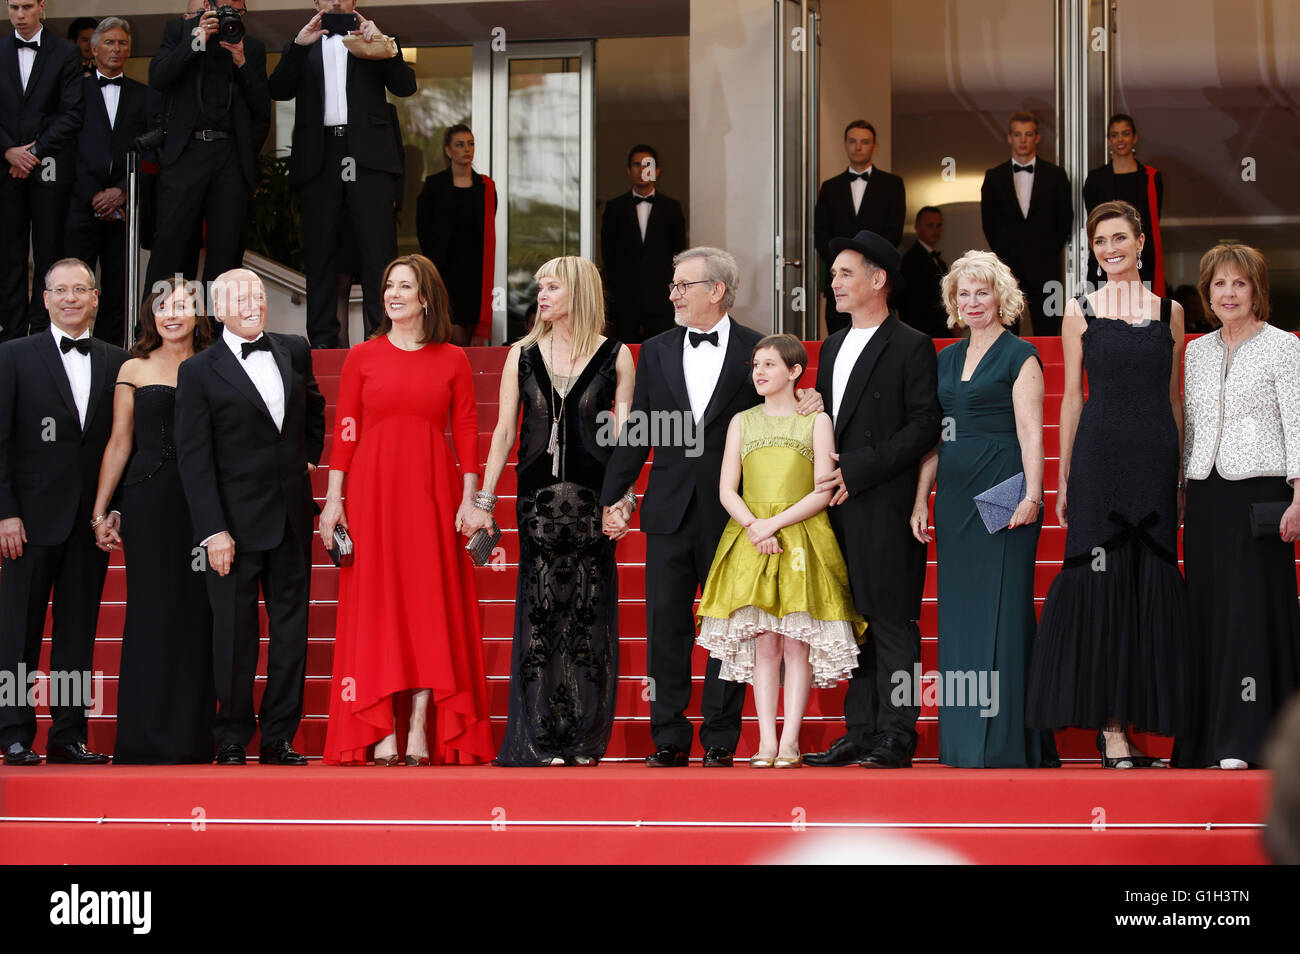 Guest, Kristie Macosko, Frank Marshall, Kathleen Kennedy, Kate Capshaw, Steven Spielberg, Ruby Barnhill, Mark Rylance, Claire van Kampen, Lucy Dahl and Penelope Wilton attending the 'The BFG' premiere during the 69th Cannes Film Festival at the Palais des Festivals in Cannes on May 14, 2016 | usage worldwide Stock Photo